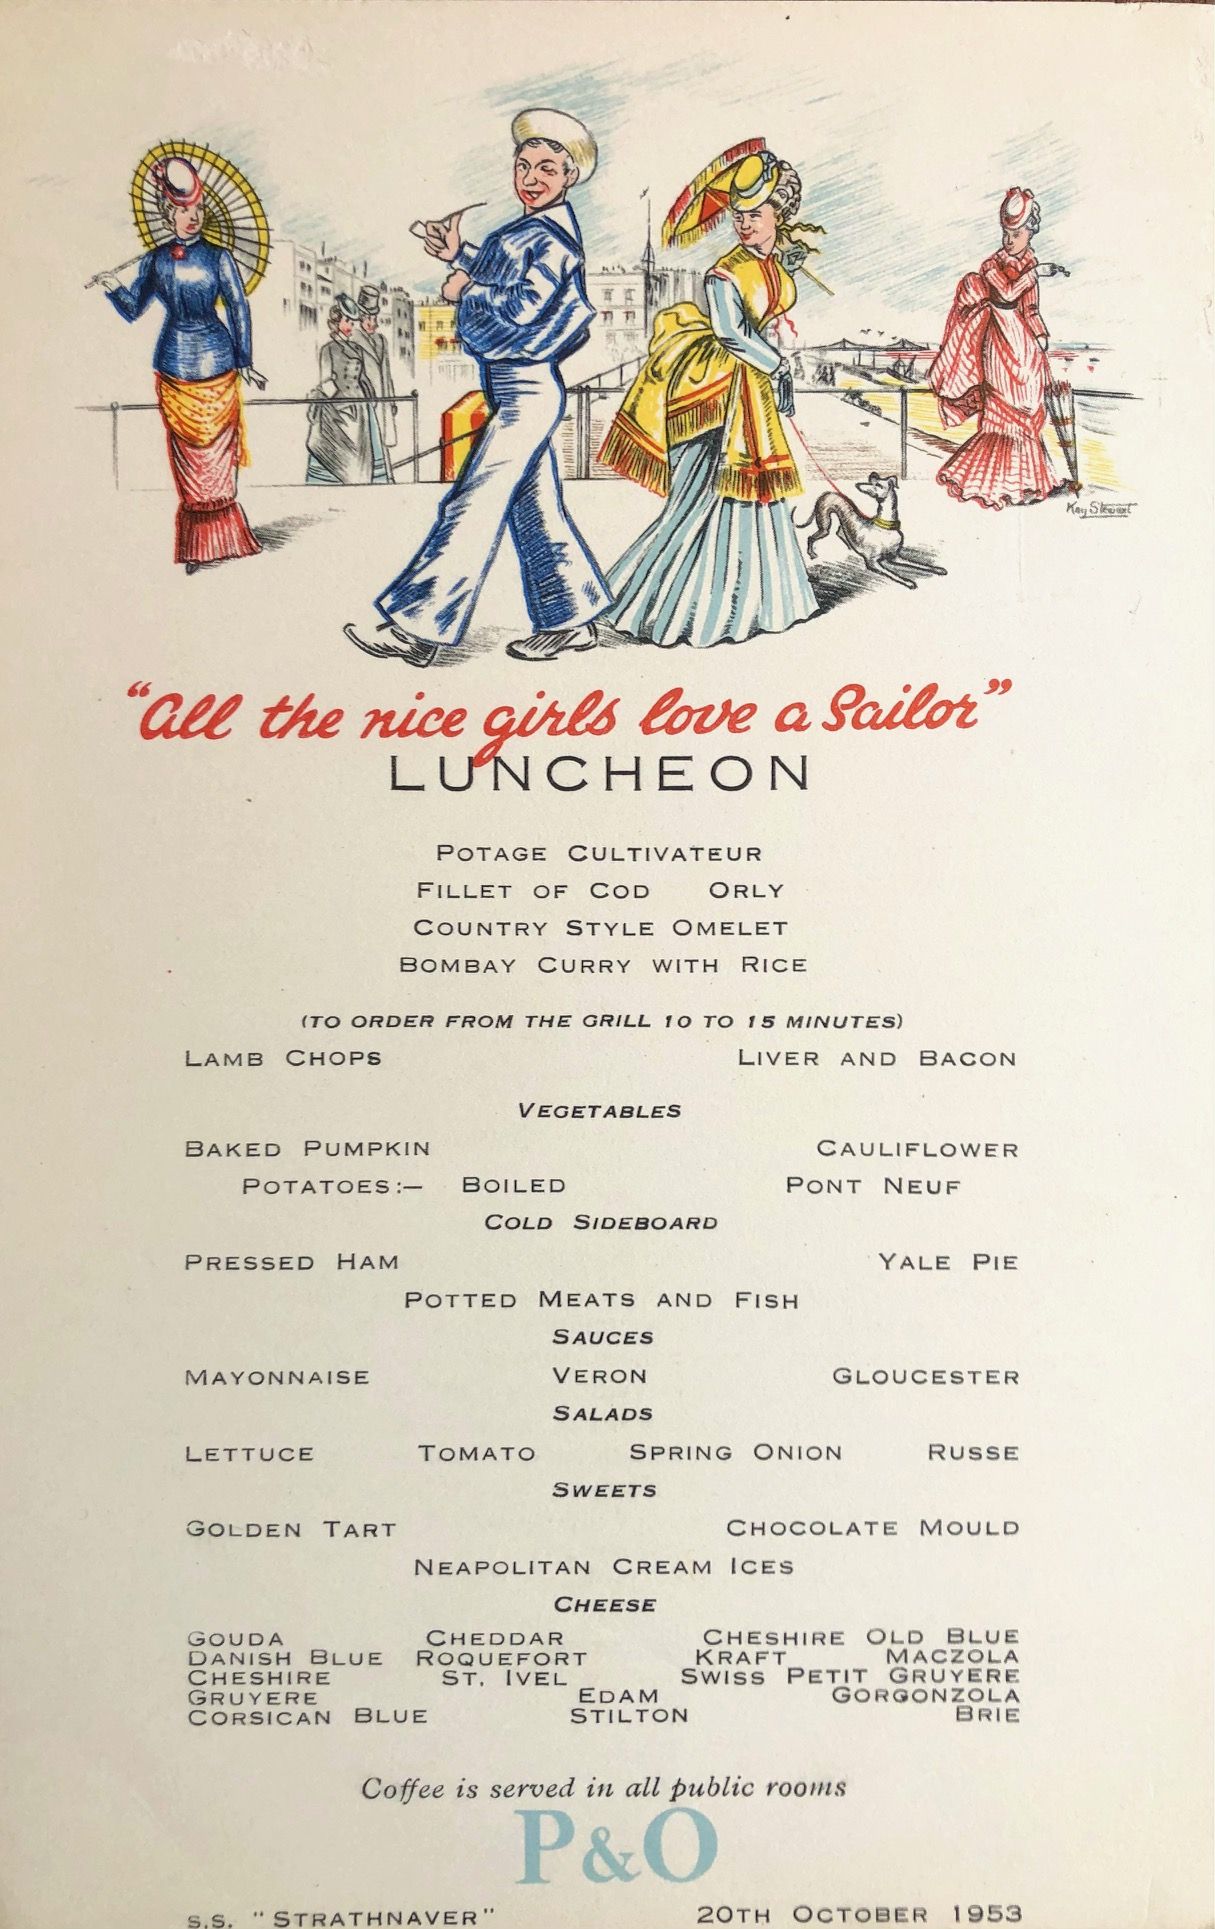 *NEW* P & O Lines. S.S. "Strathnaver" Luncheon Menu - All the Nice Girls Love a Sailor